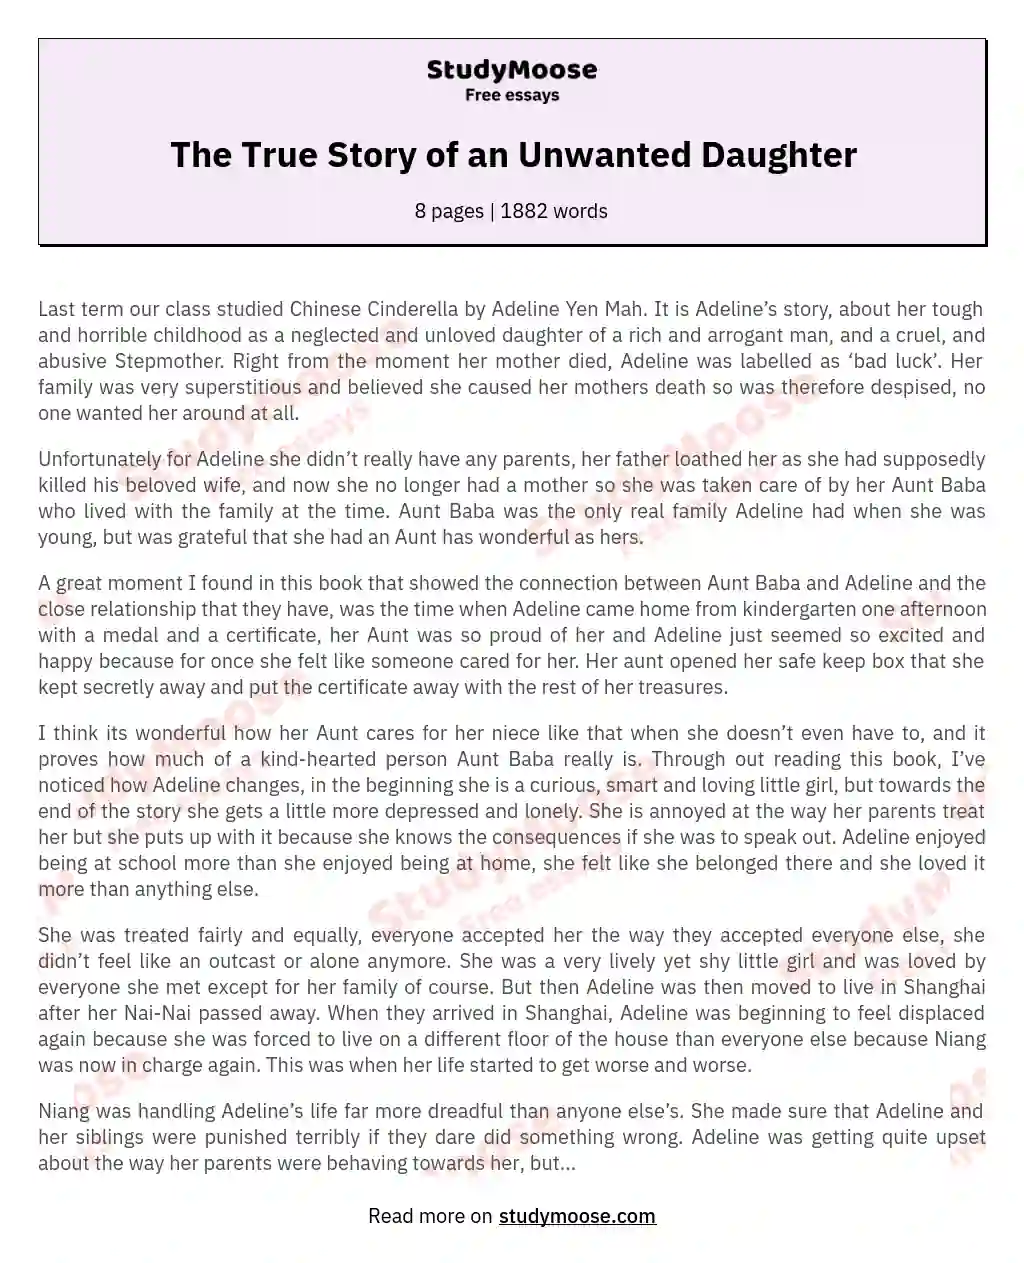 The True Story of an Unwanted Daughter essay